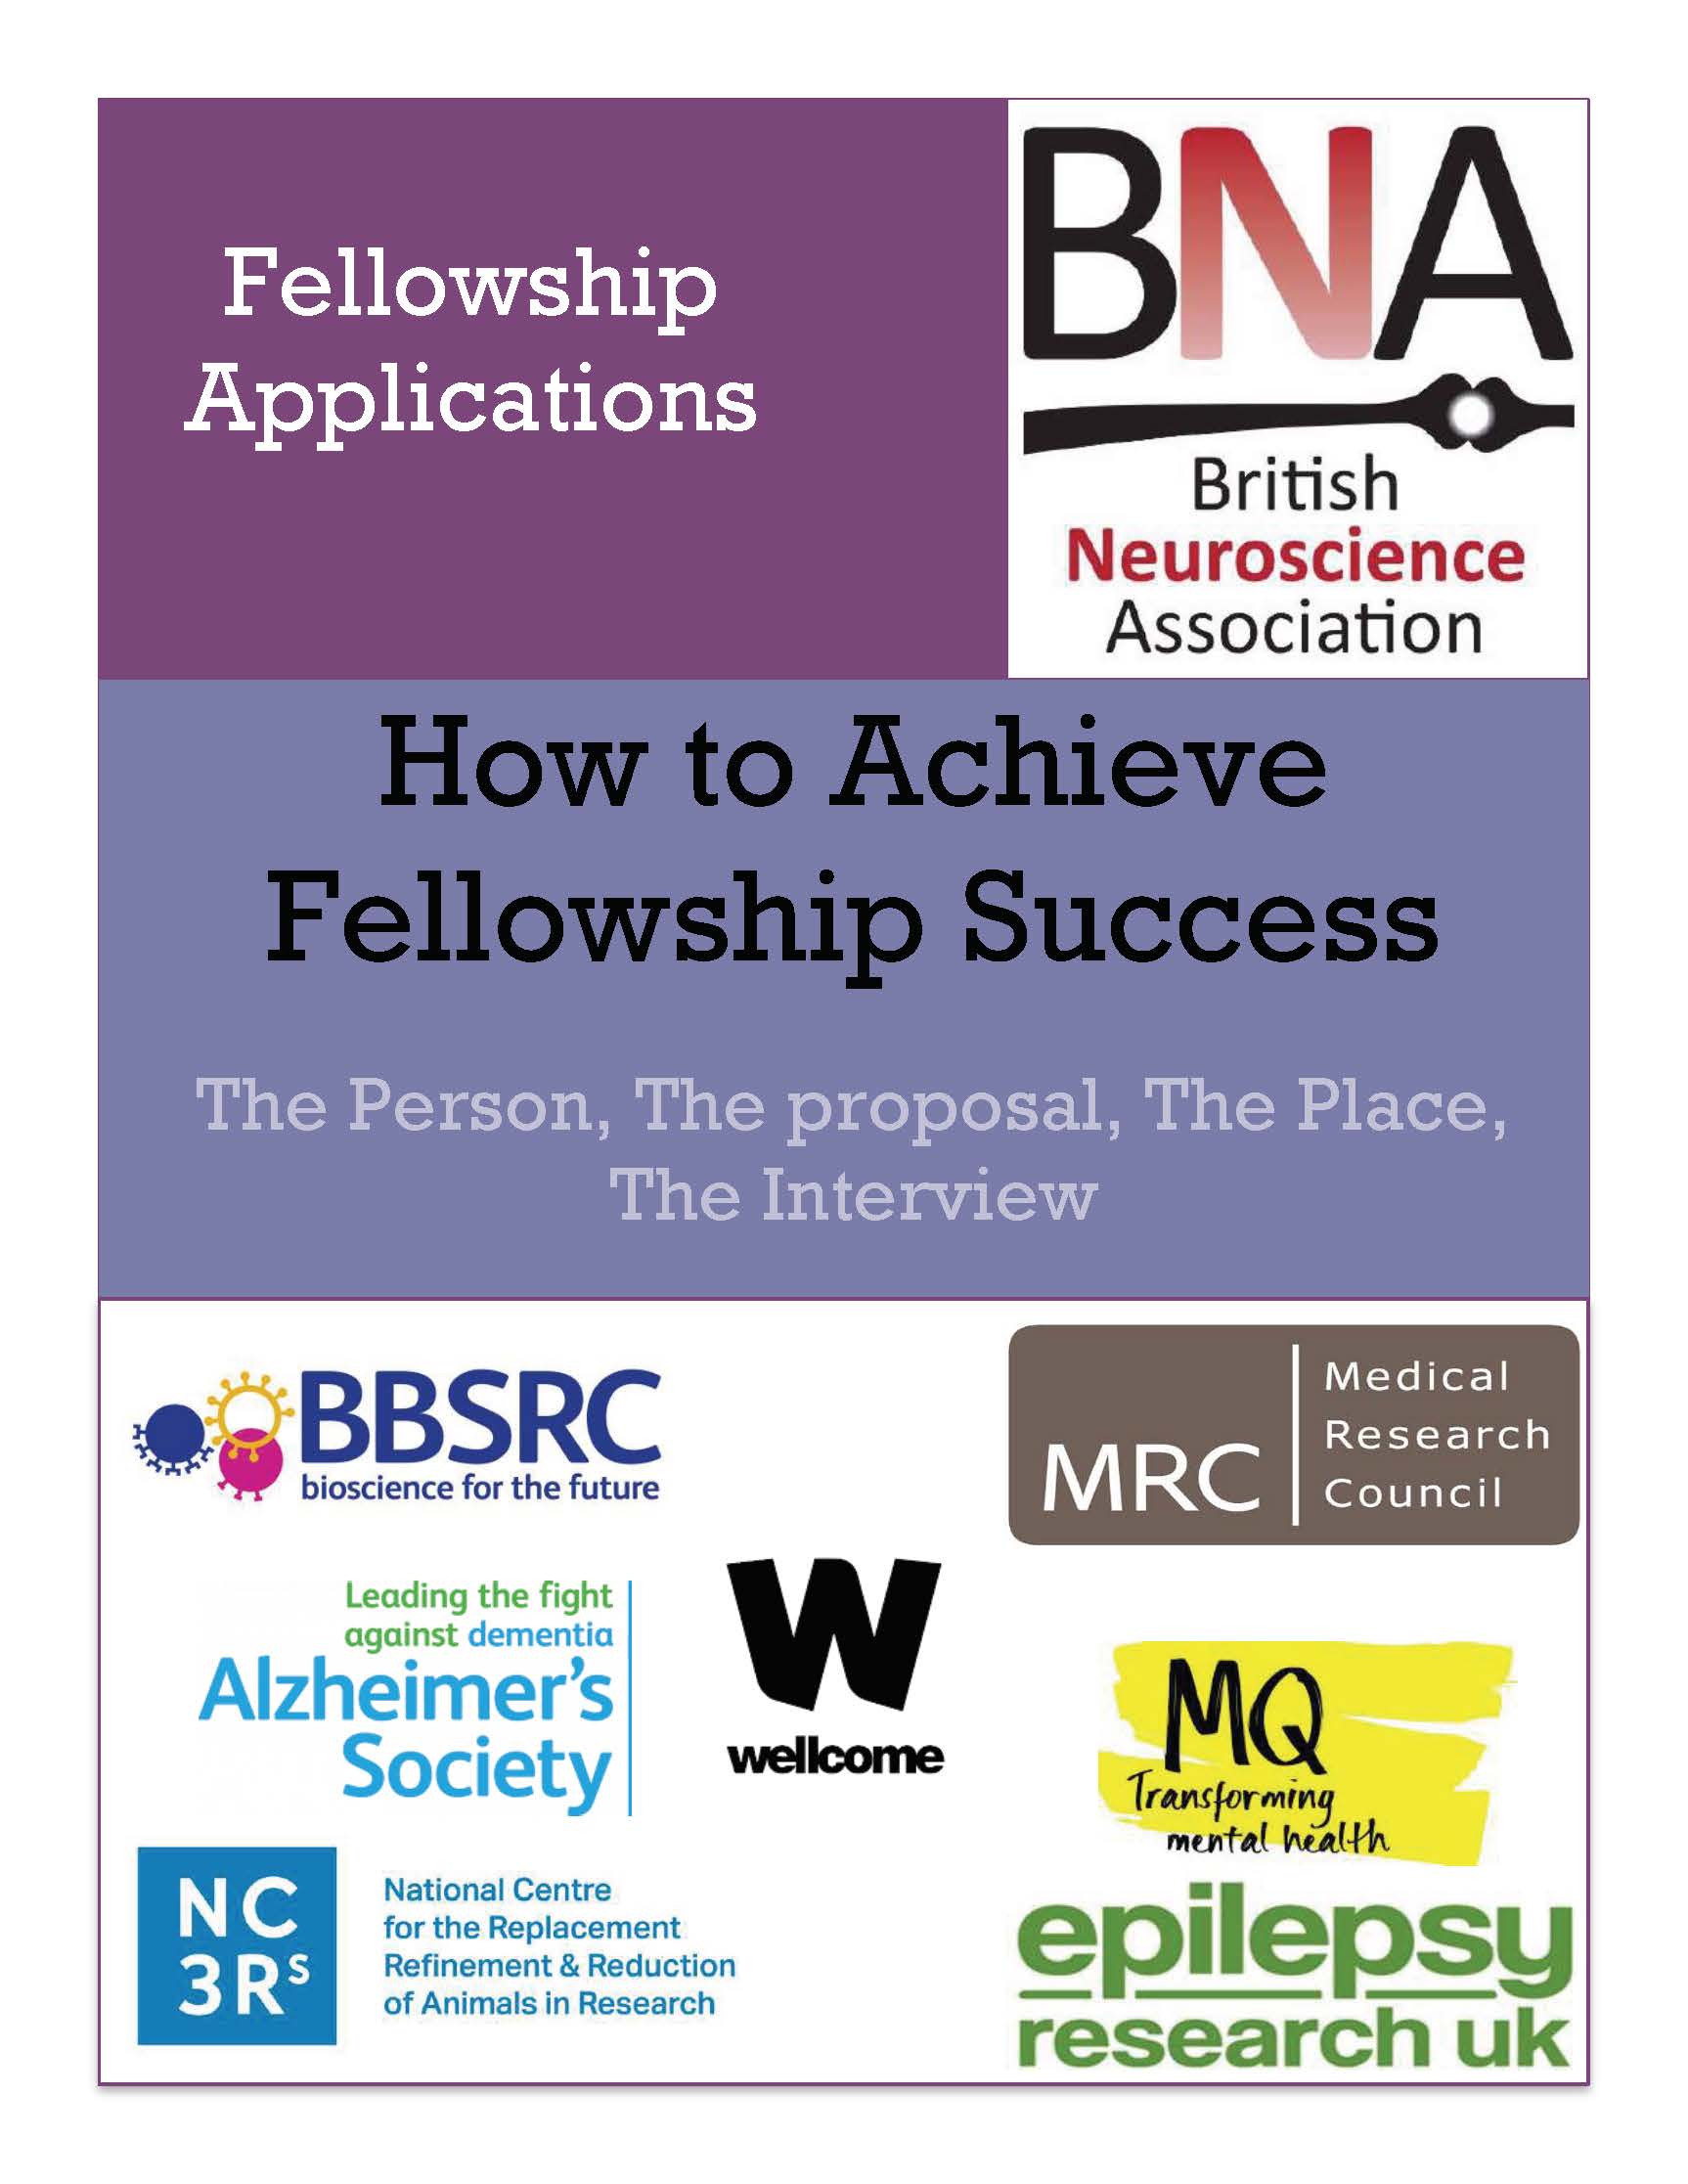 How to achieve Fellowship success: a guide for neuroscientists